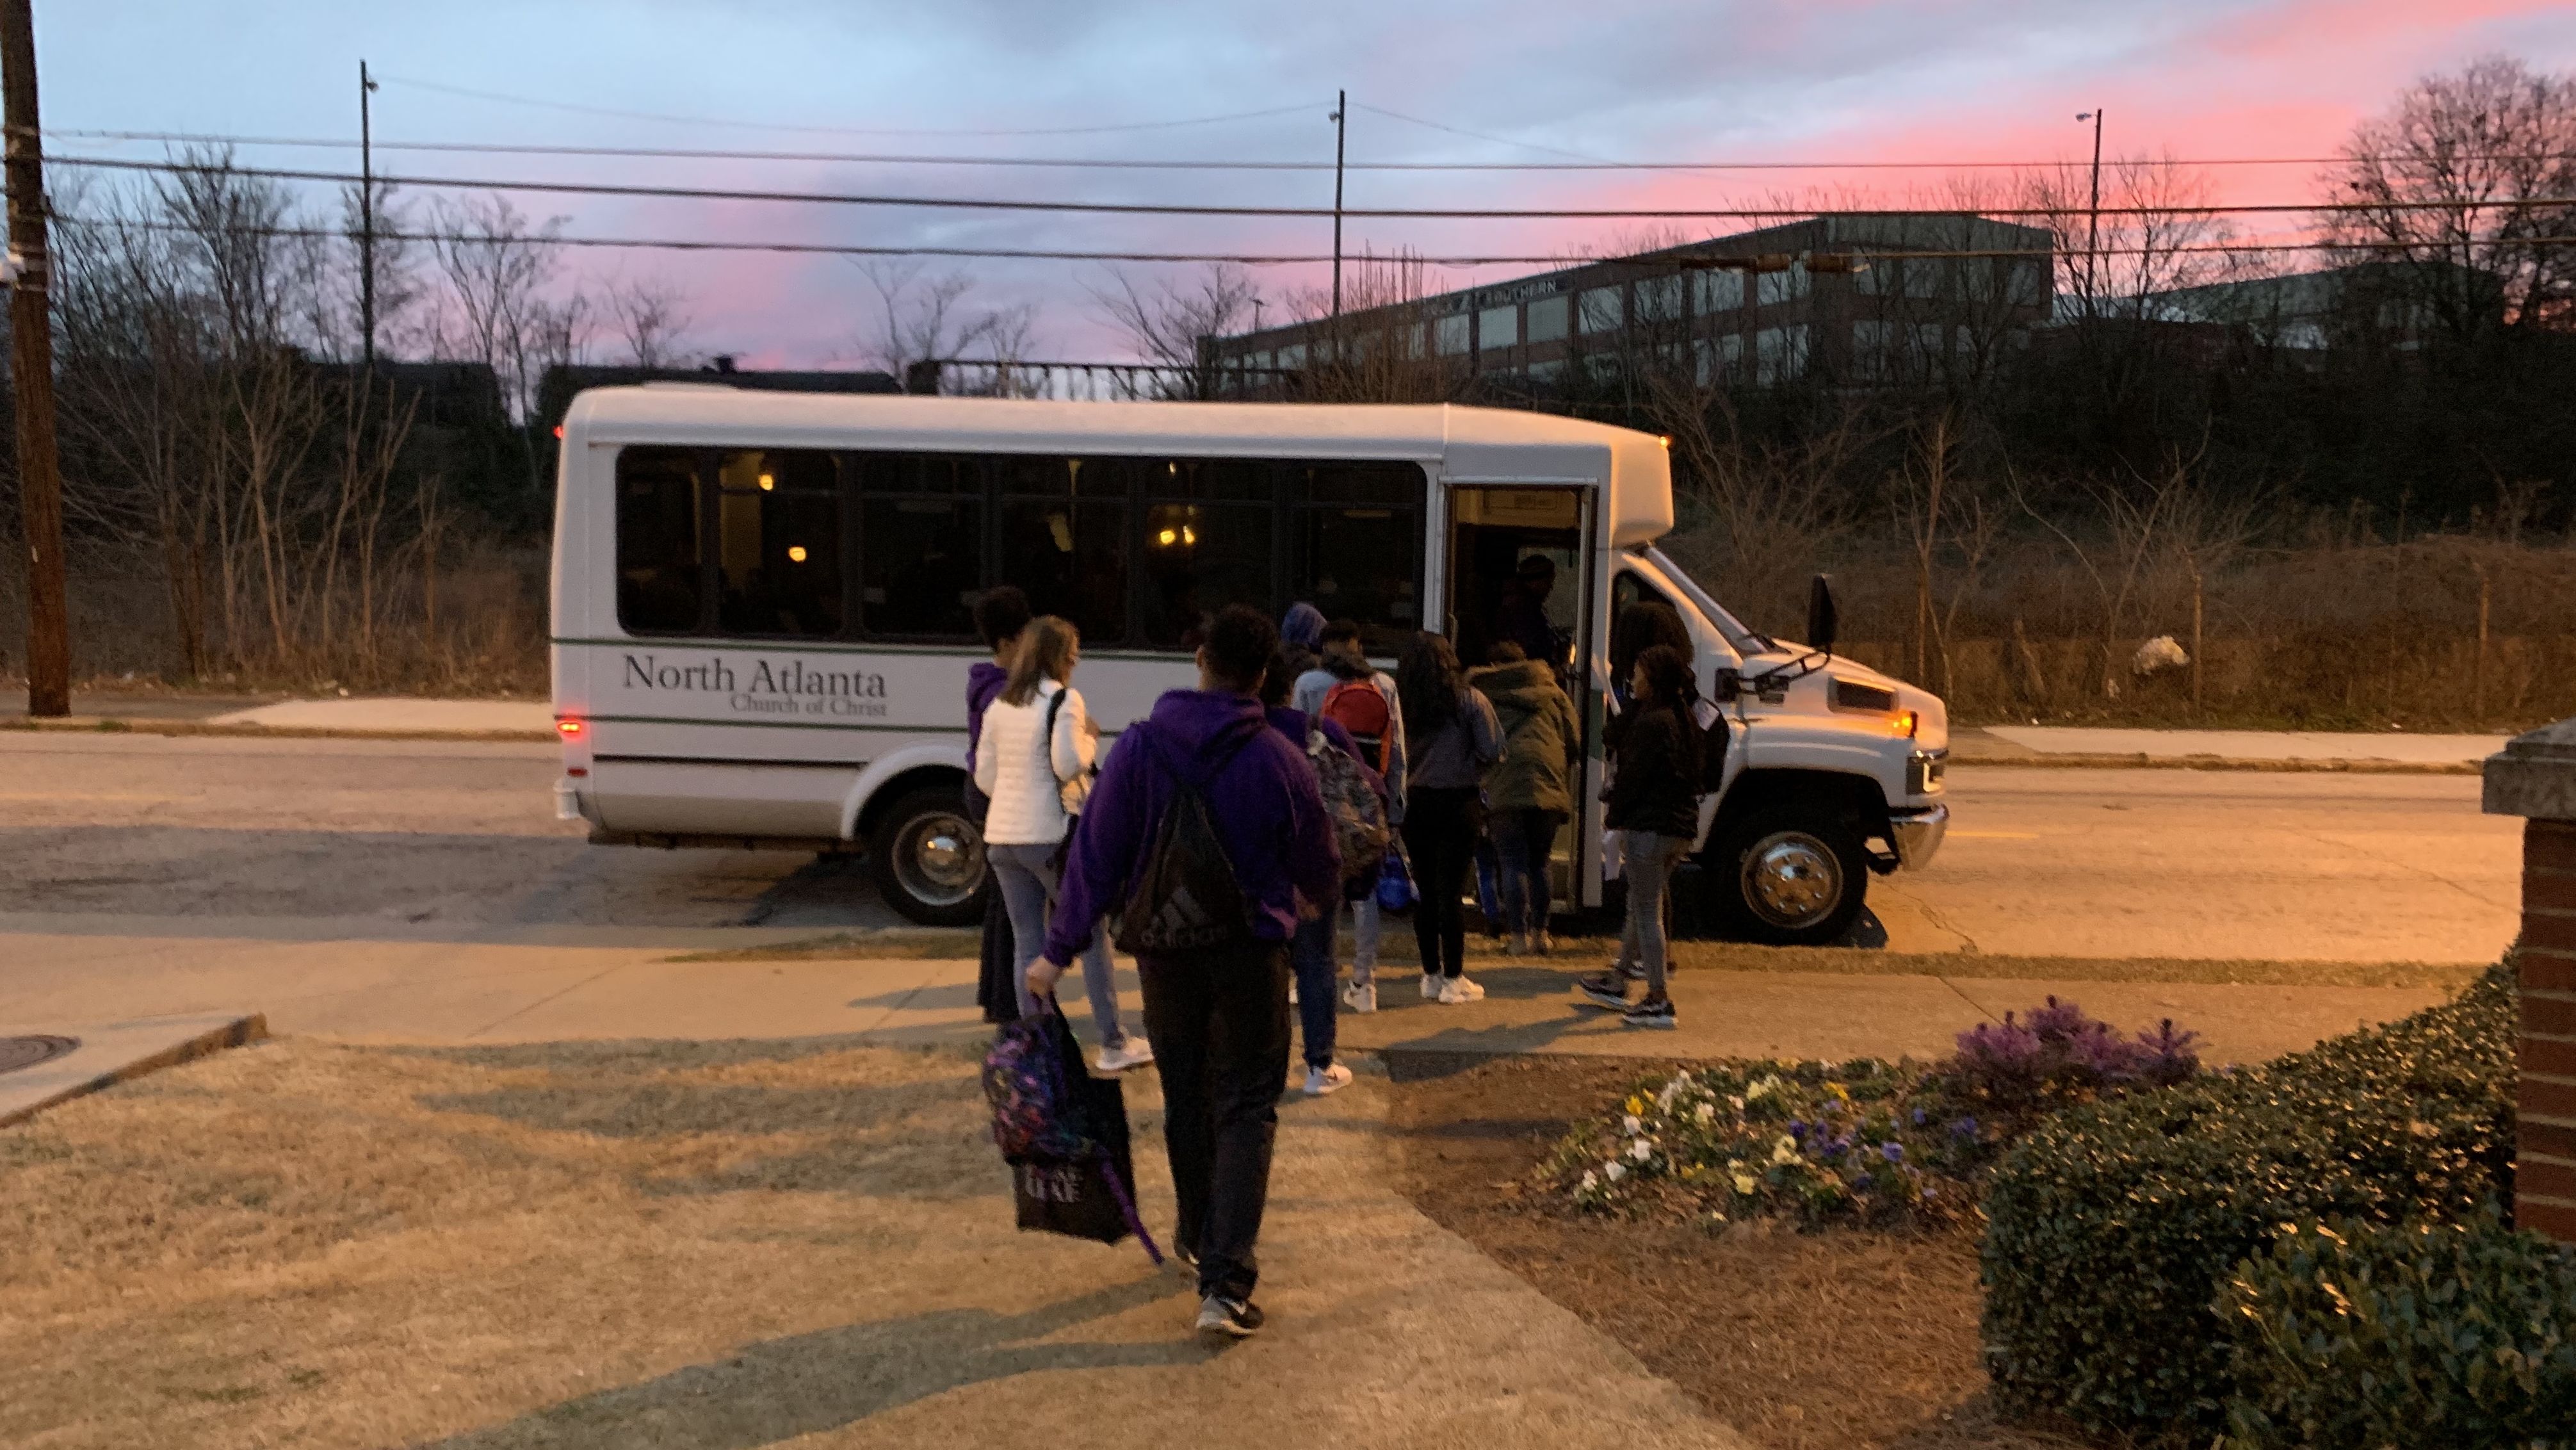 Relatives of incarcerated mothers board a bus bound for two women's prisons in Georgia.